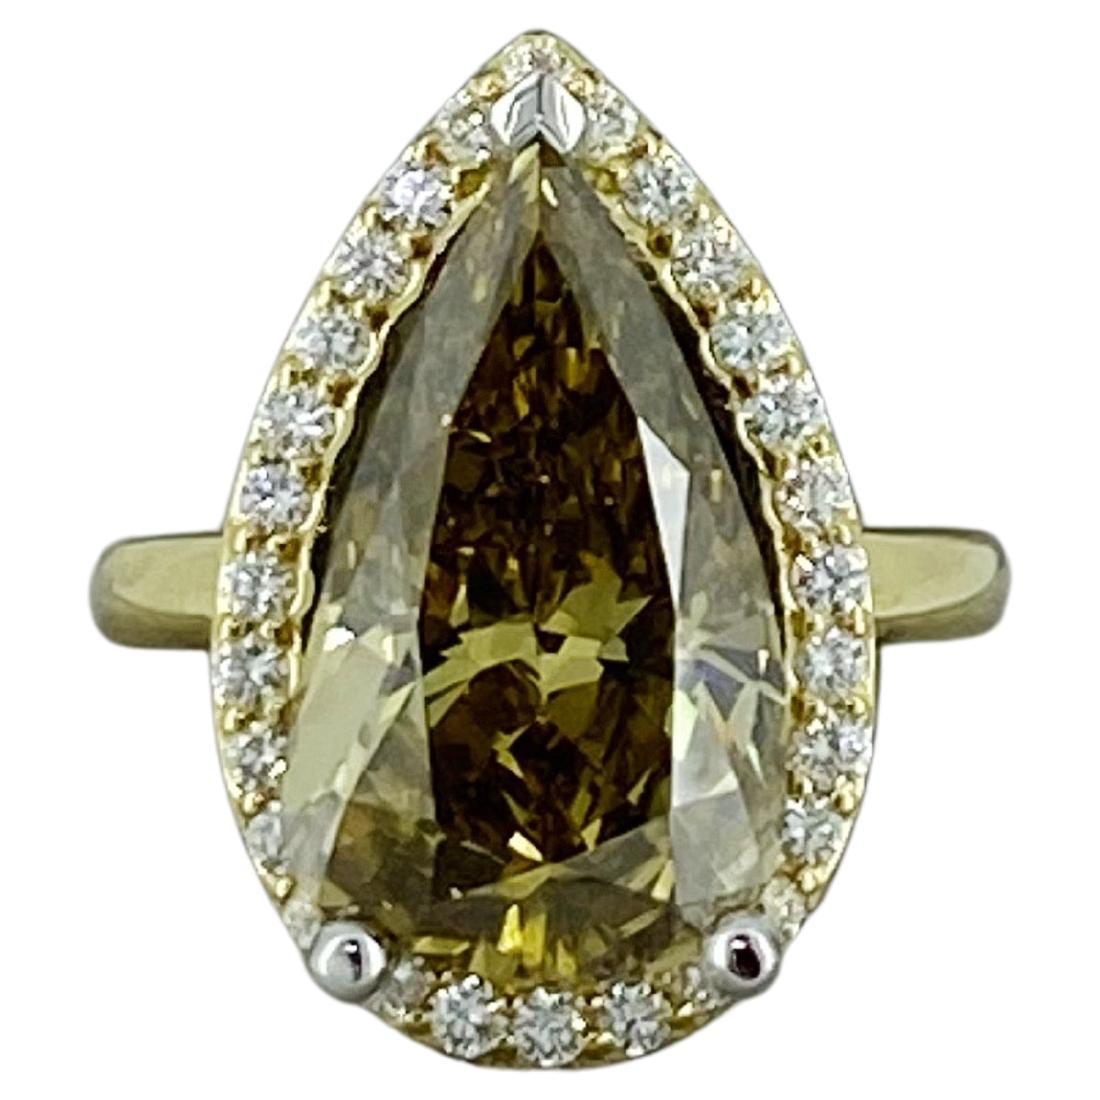 6.36ct Fancy Brownish Yellow Natural Pear Cut Diamond Ring in 18K Yellow Gold For Sale